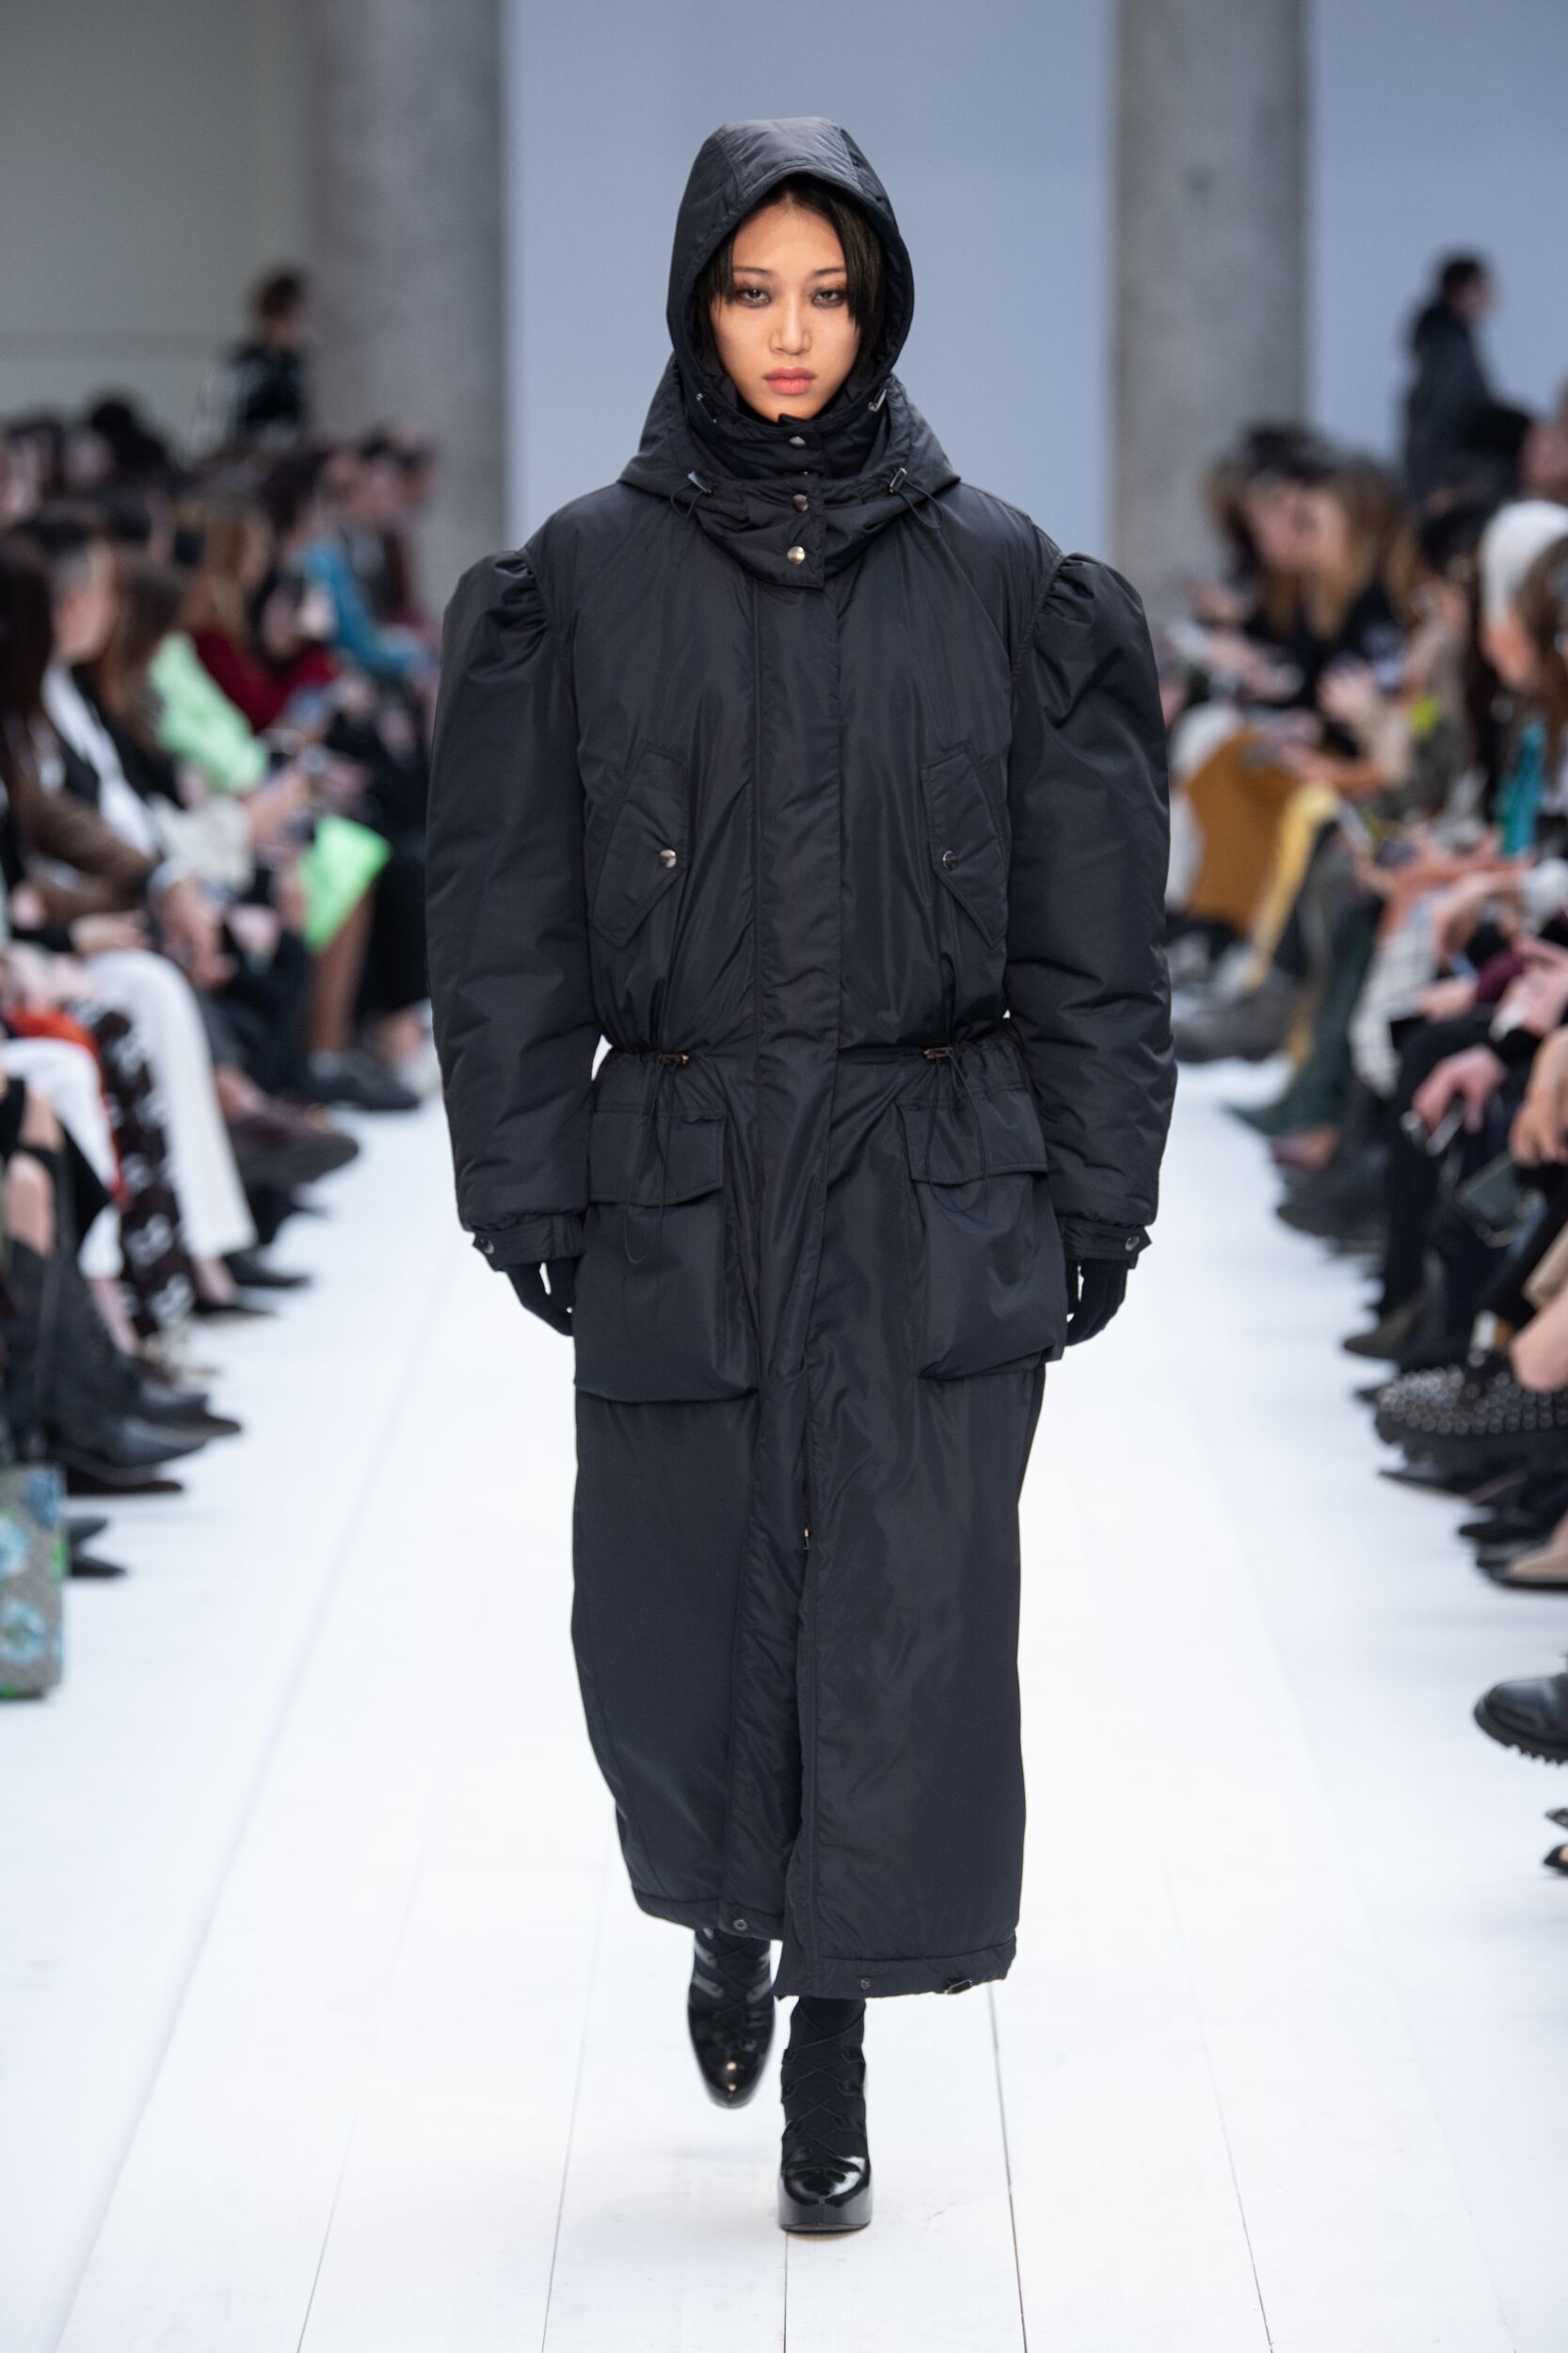 MAX MARA FALL WINTER 2020 WOMEN’S COLLECTION | The Skinny Beep